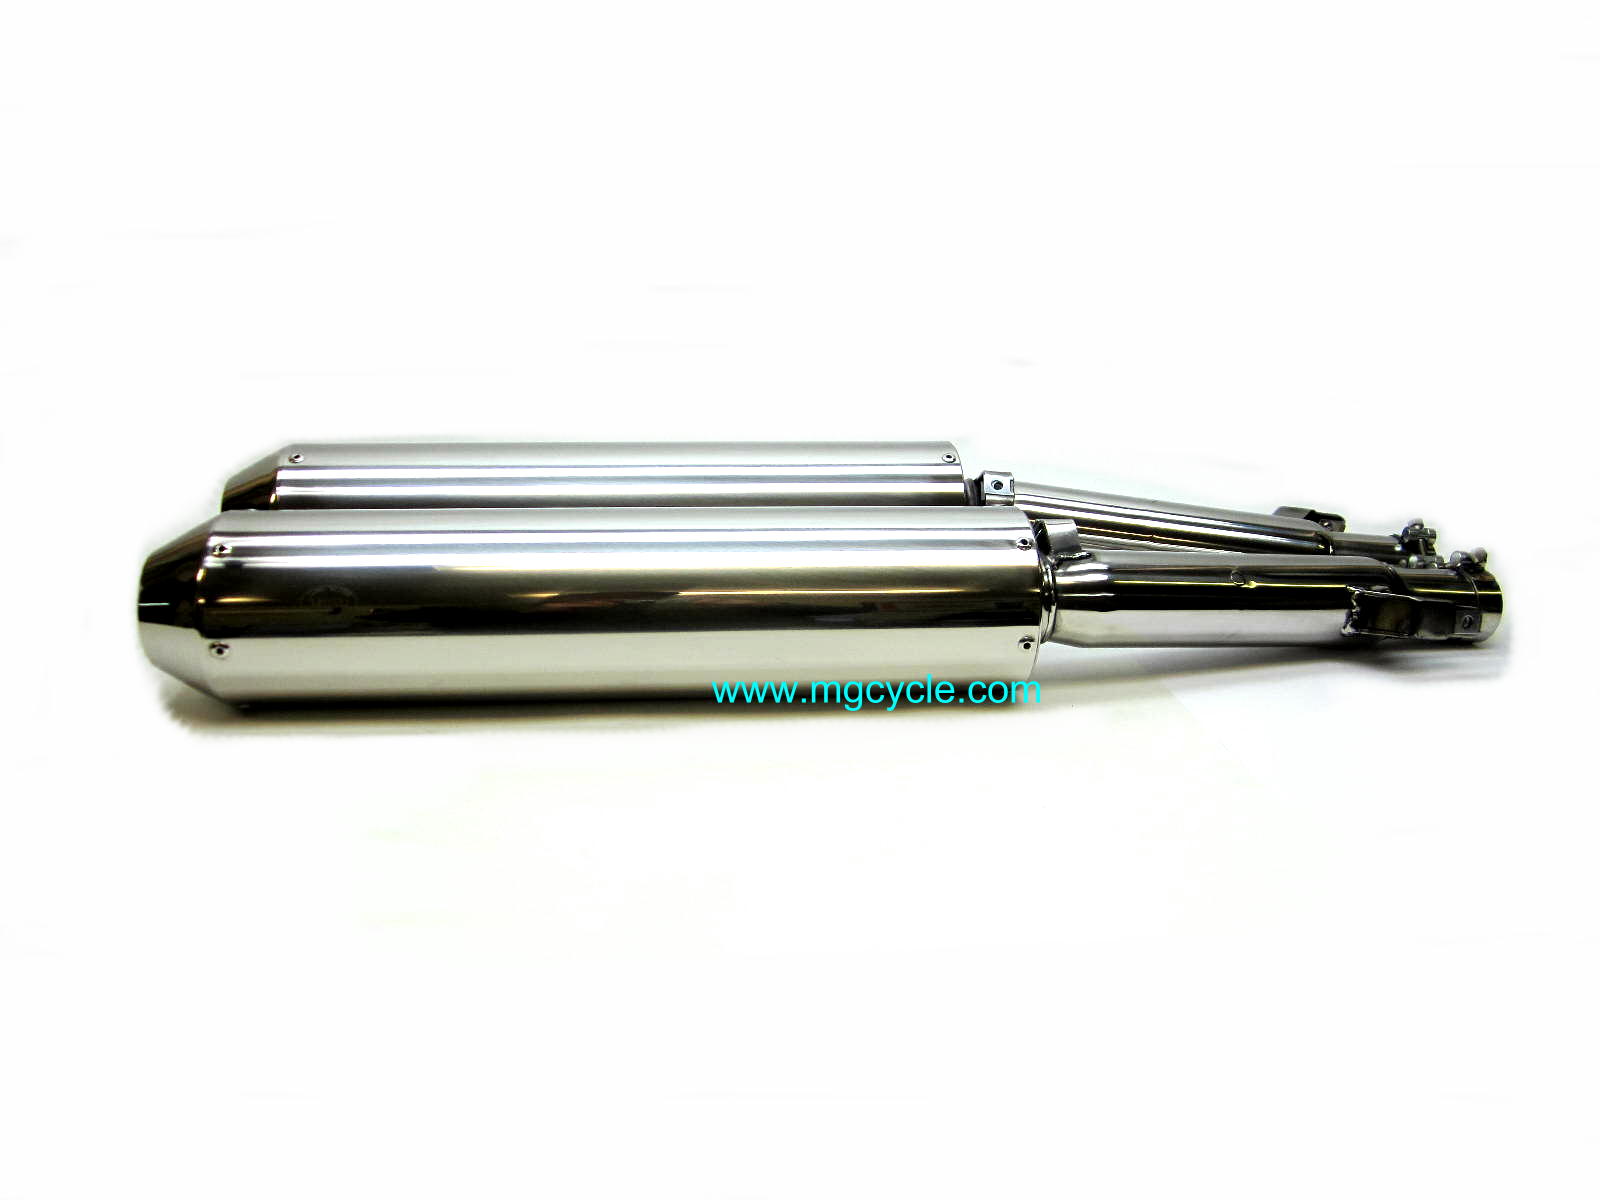 Mistral California 1400 slip-on mufflers, conical, polished